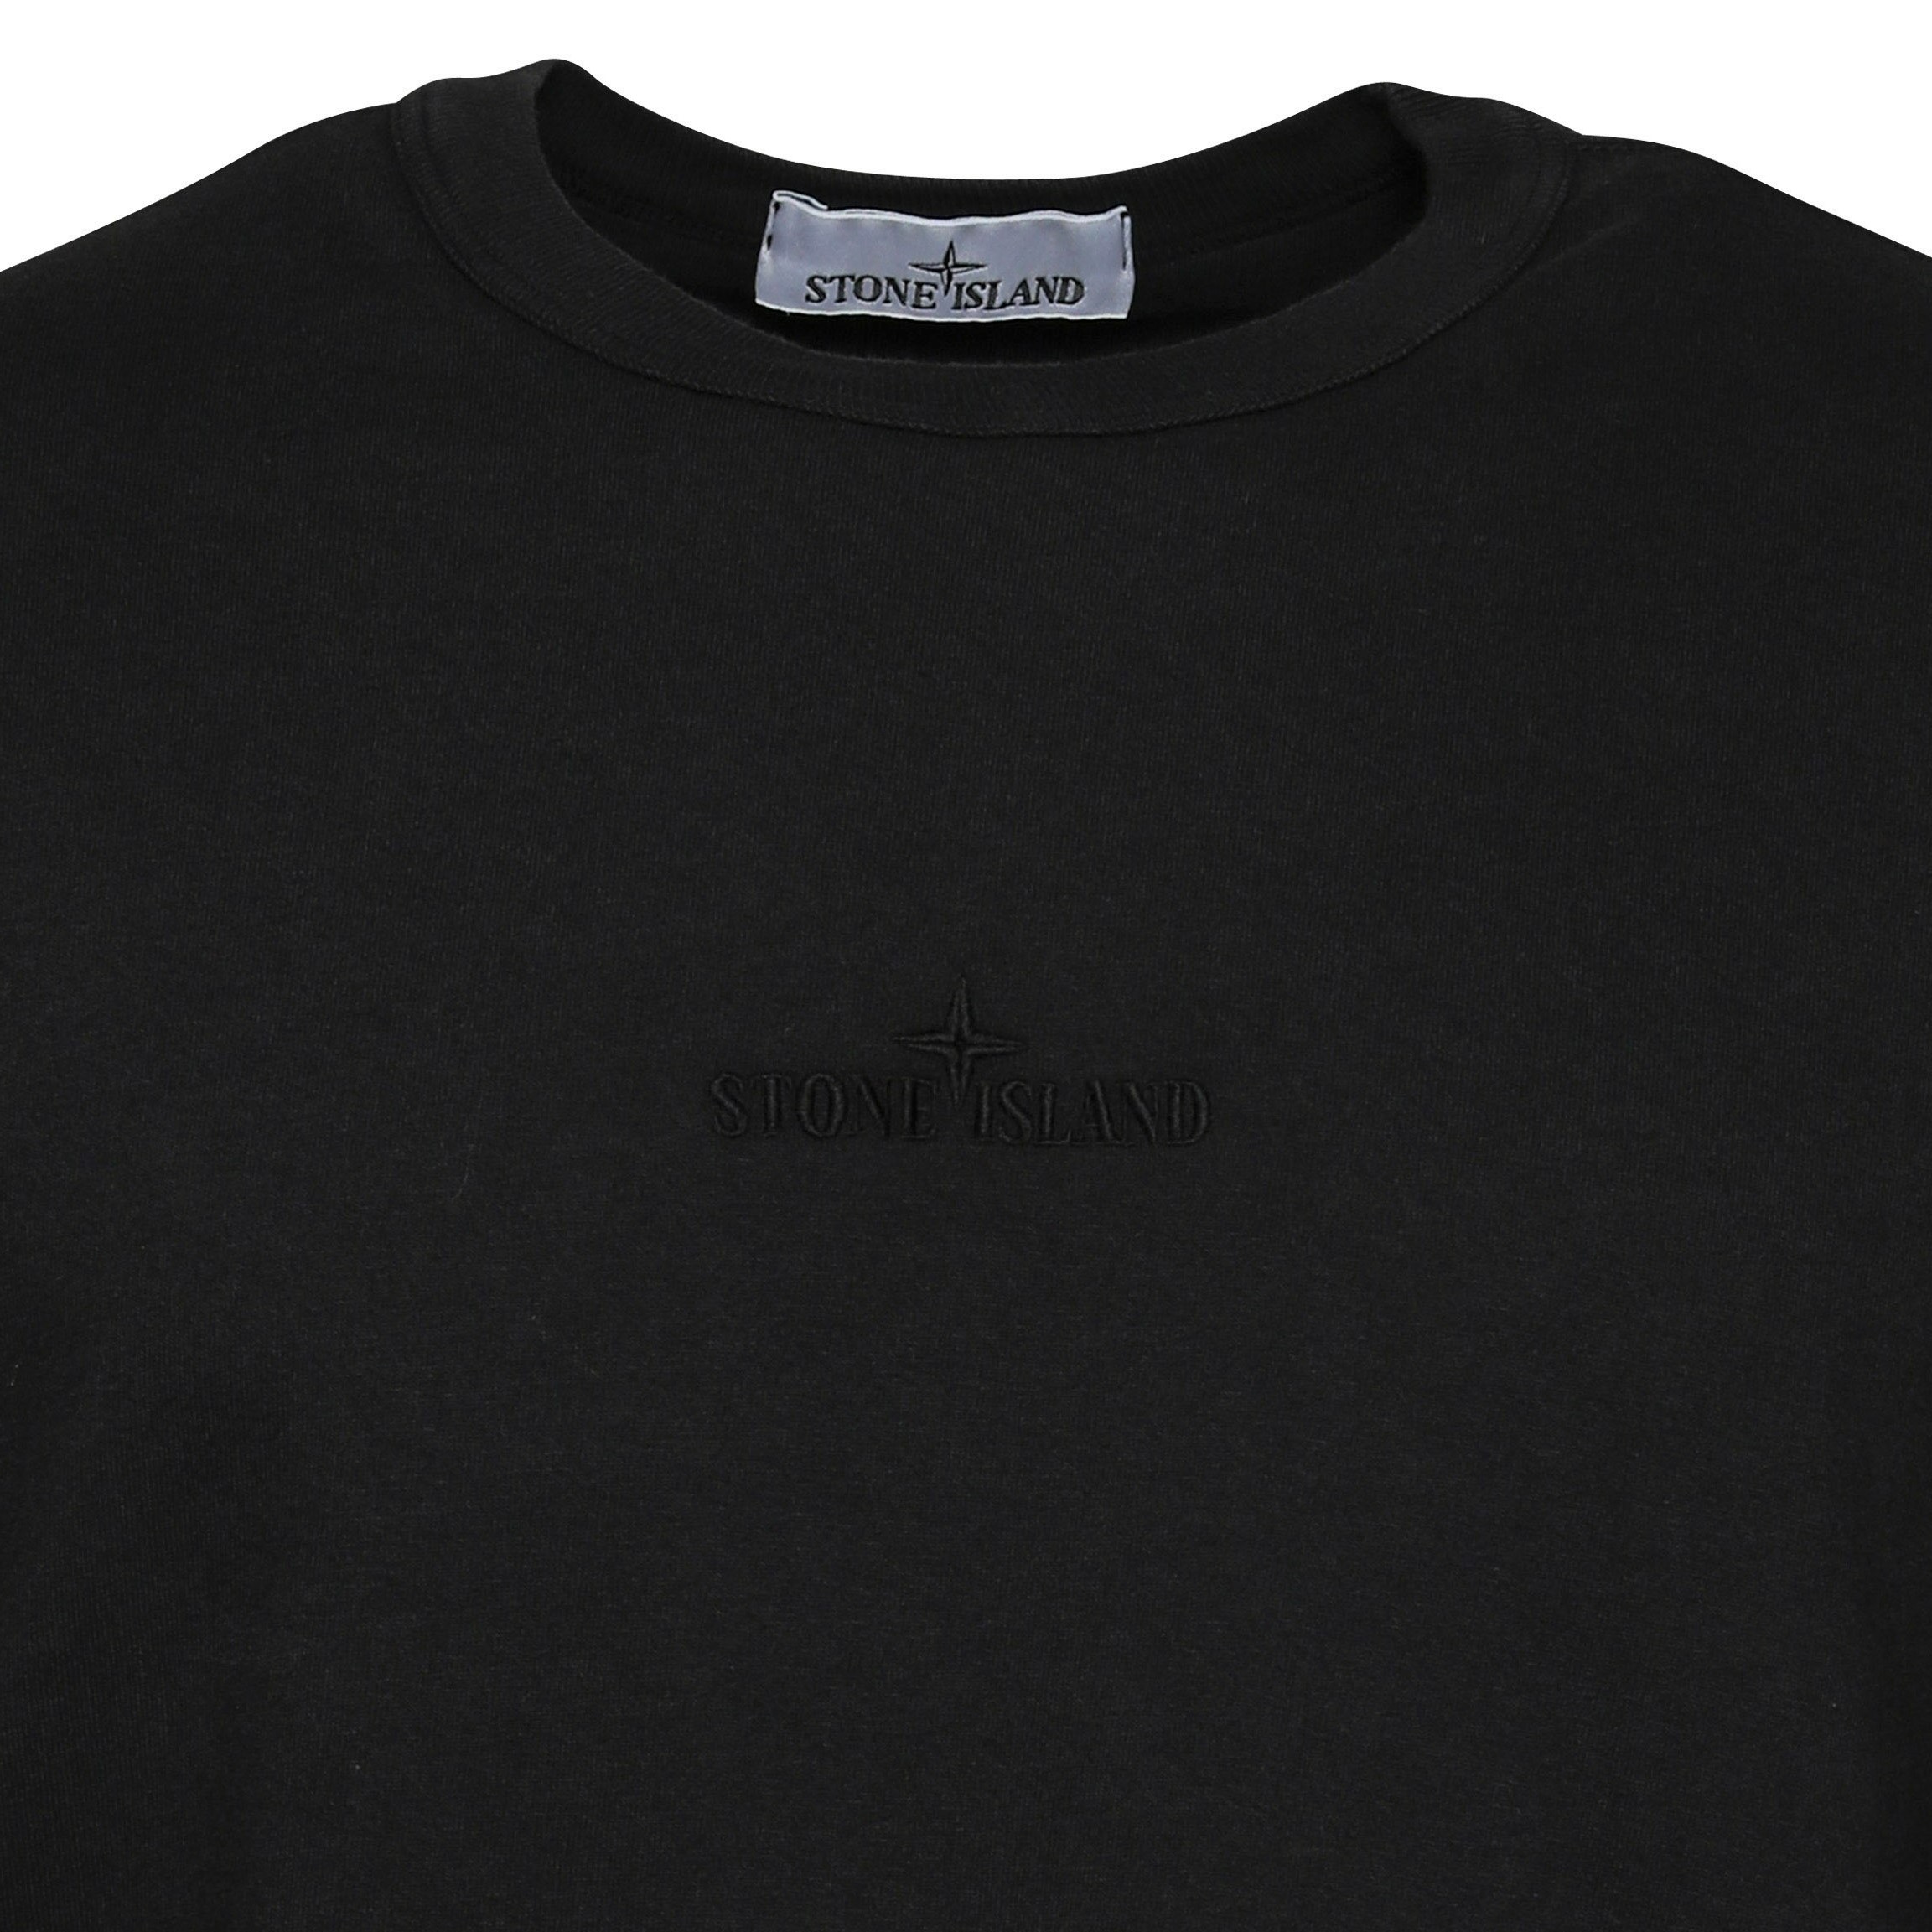 STONE ISLAND Oversized Stamp T-Shirt in Black S